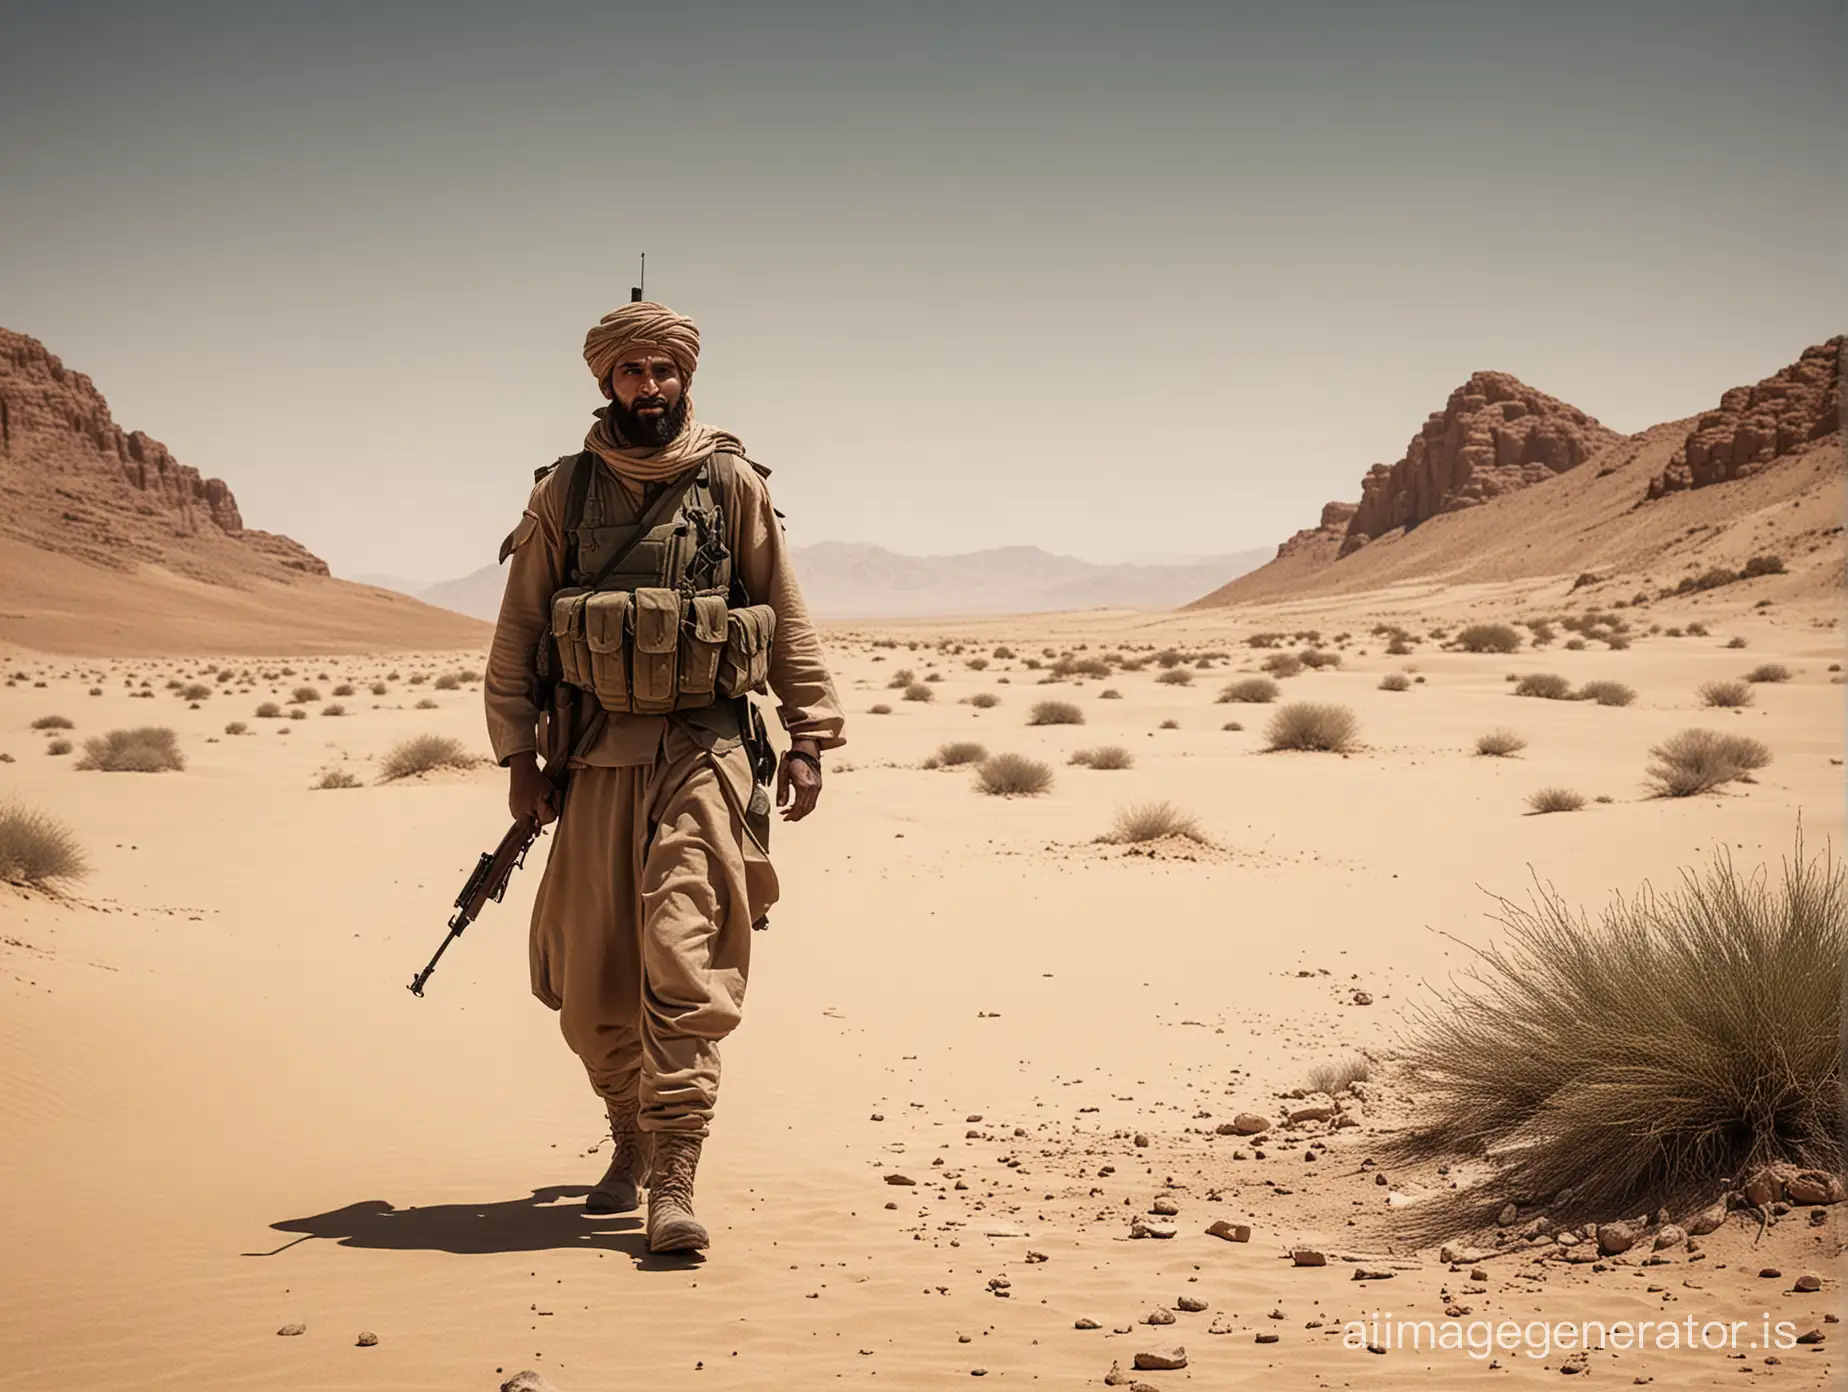 Create a compelling narrative or scene featuring an old Muslim army stationed in the vast desert, eagerly awaiting the arrival of their enemy. Capture the essence of anticipation, valor, and determination amidst the harsh desert landscapes, highlighting the wisdom and experience of the seasoned soldiers as they prepare for the impending battle.